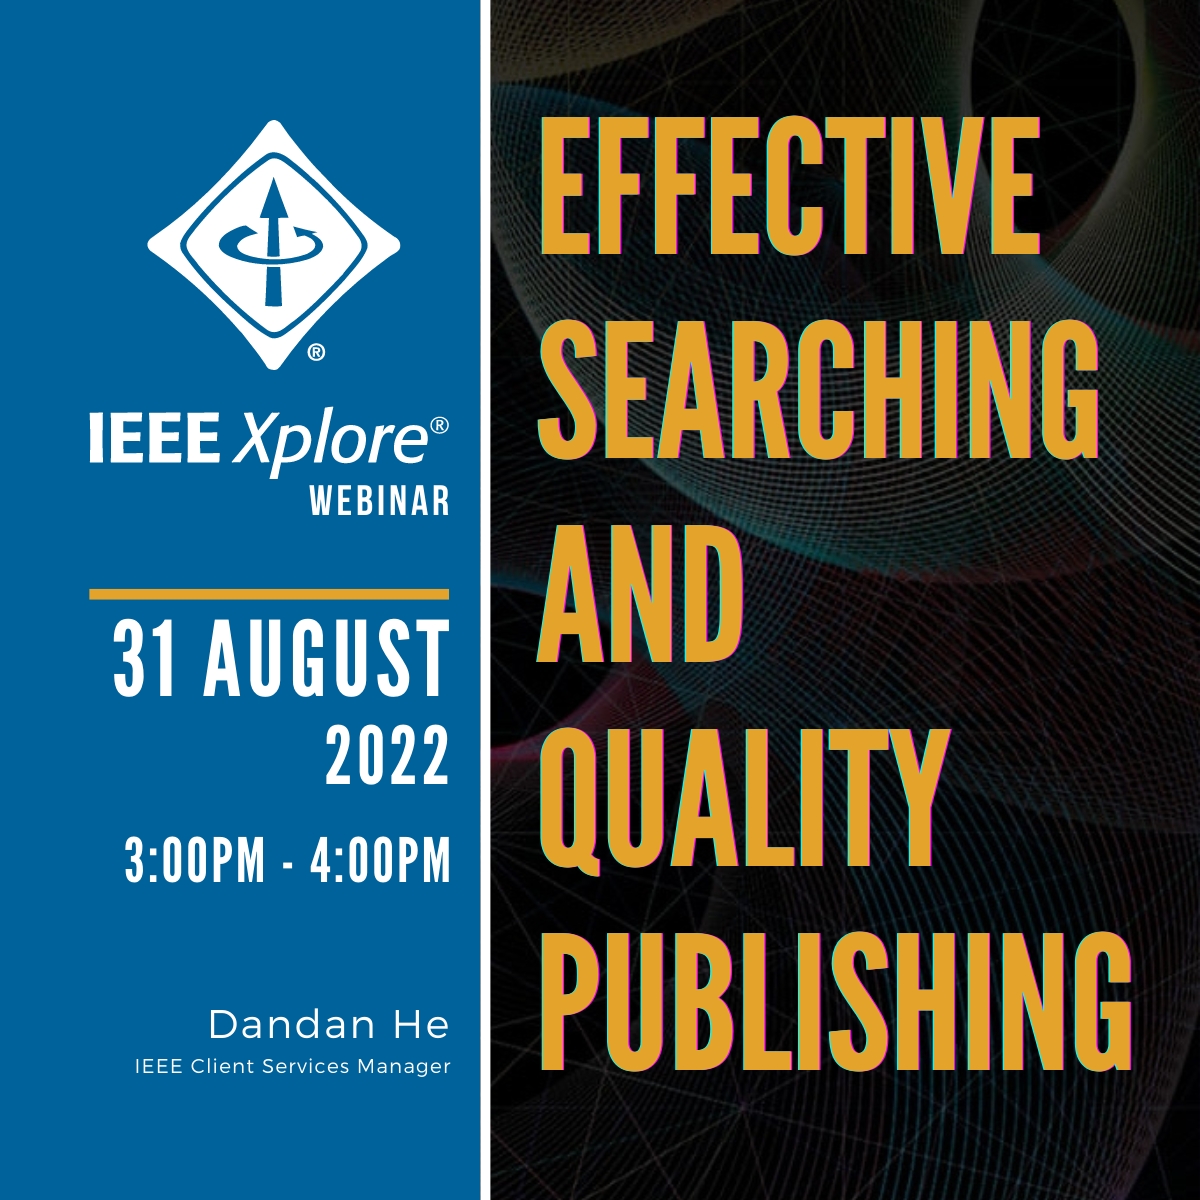 IEEE XPLORE WEBINAR: Effective Searching and Quality Publishing